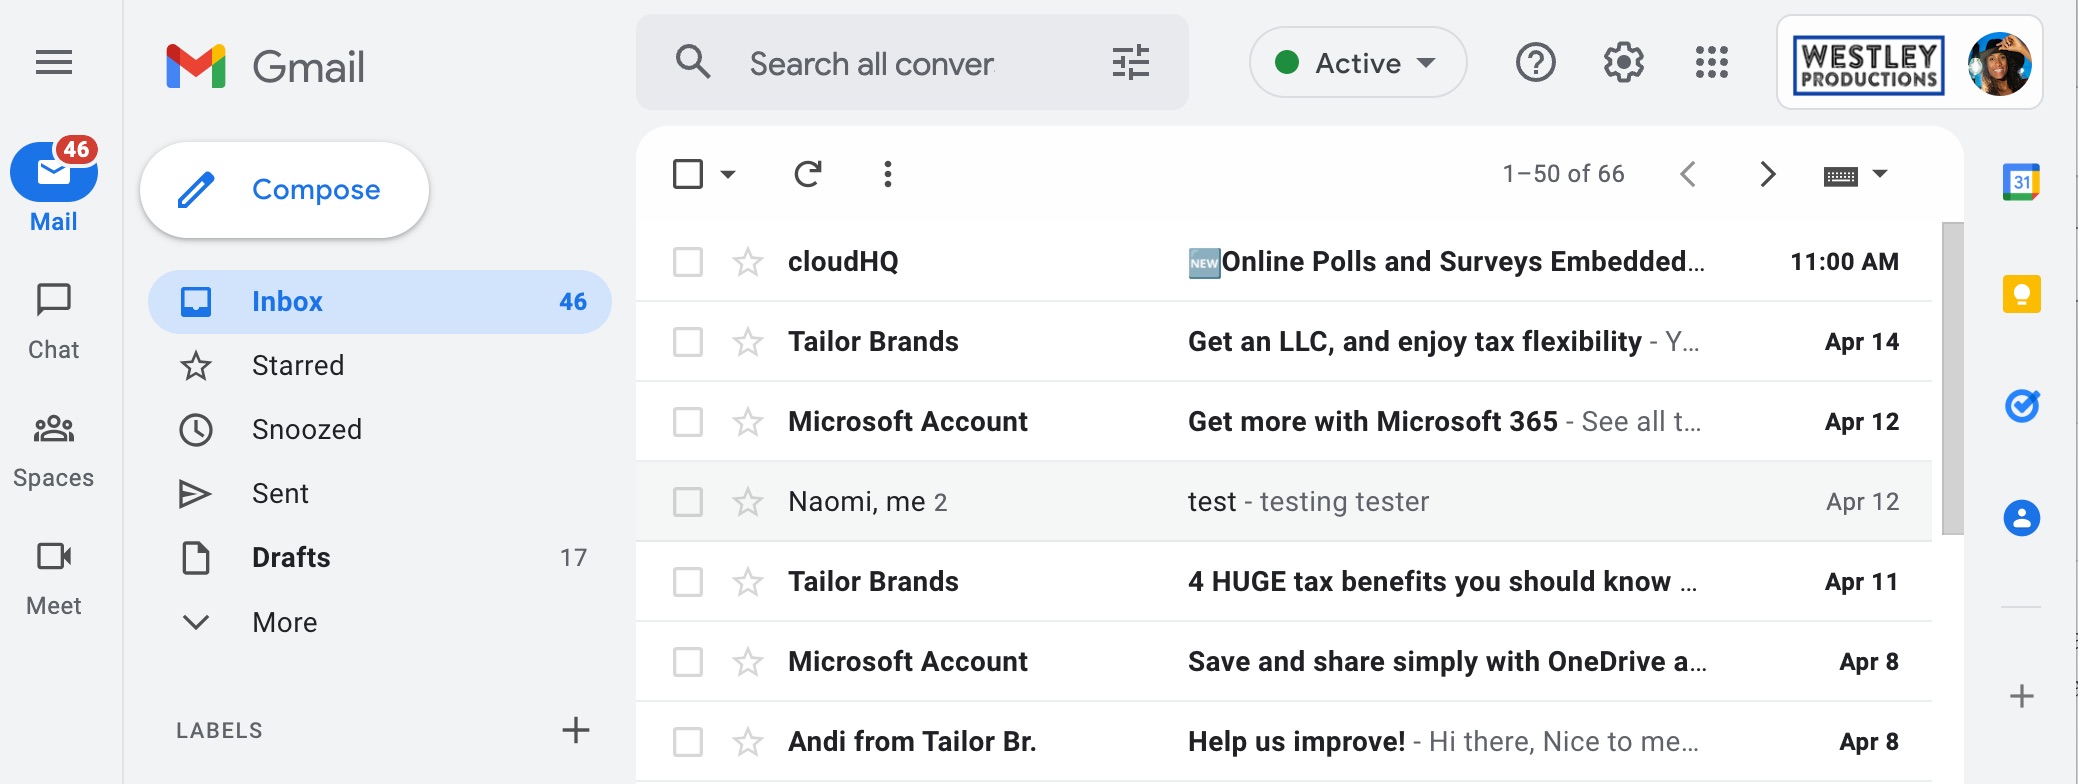 How to Customize Gmail's New Interface